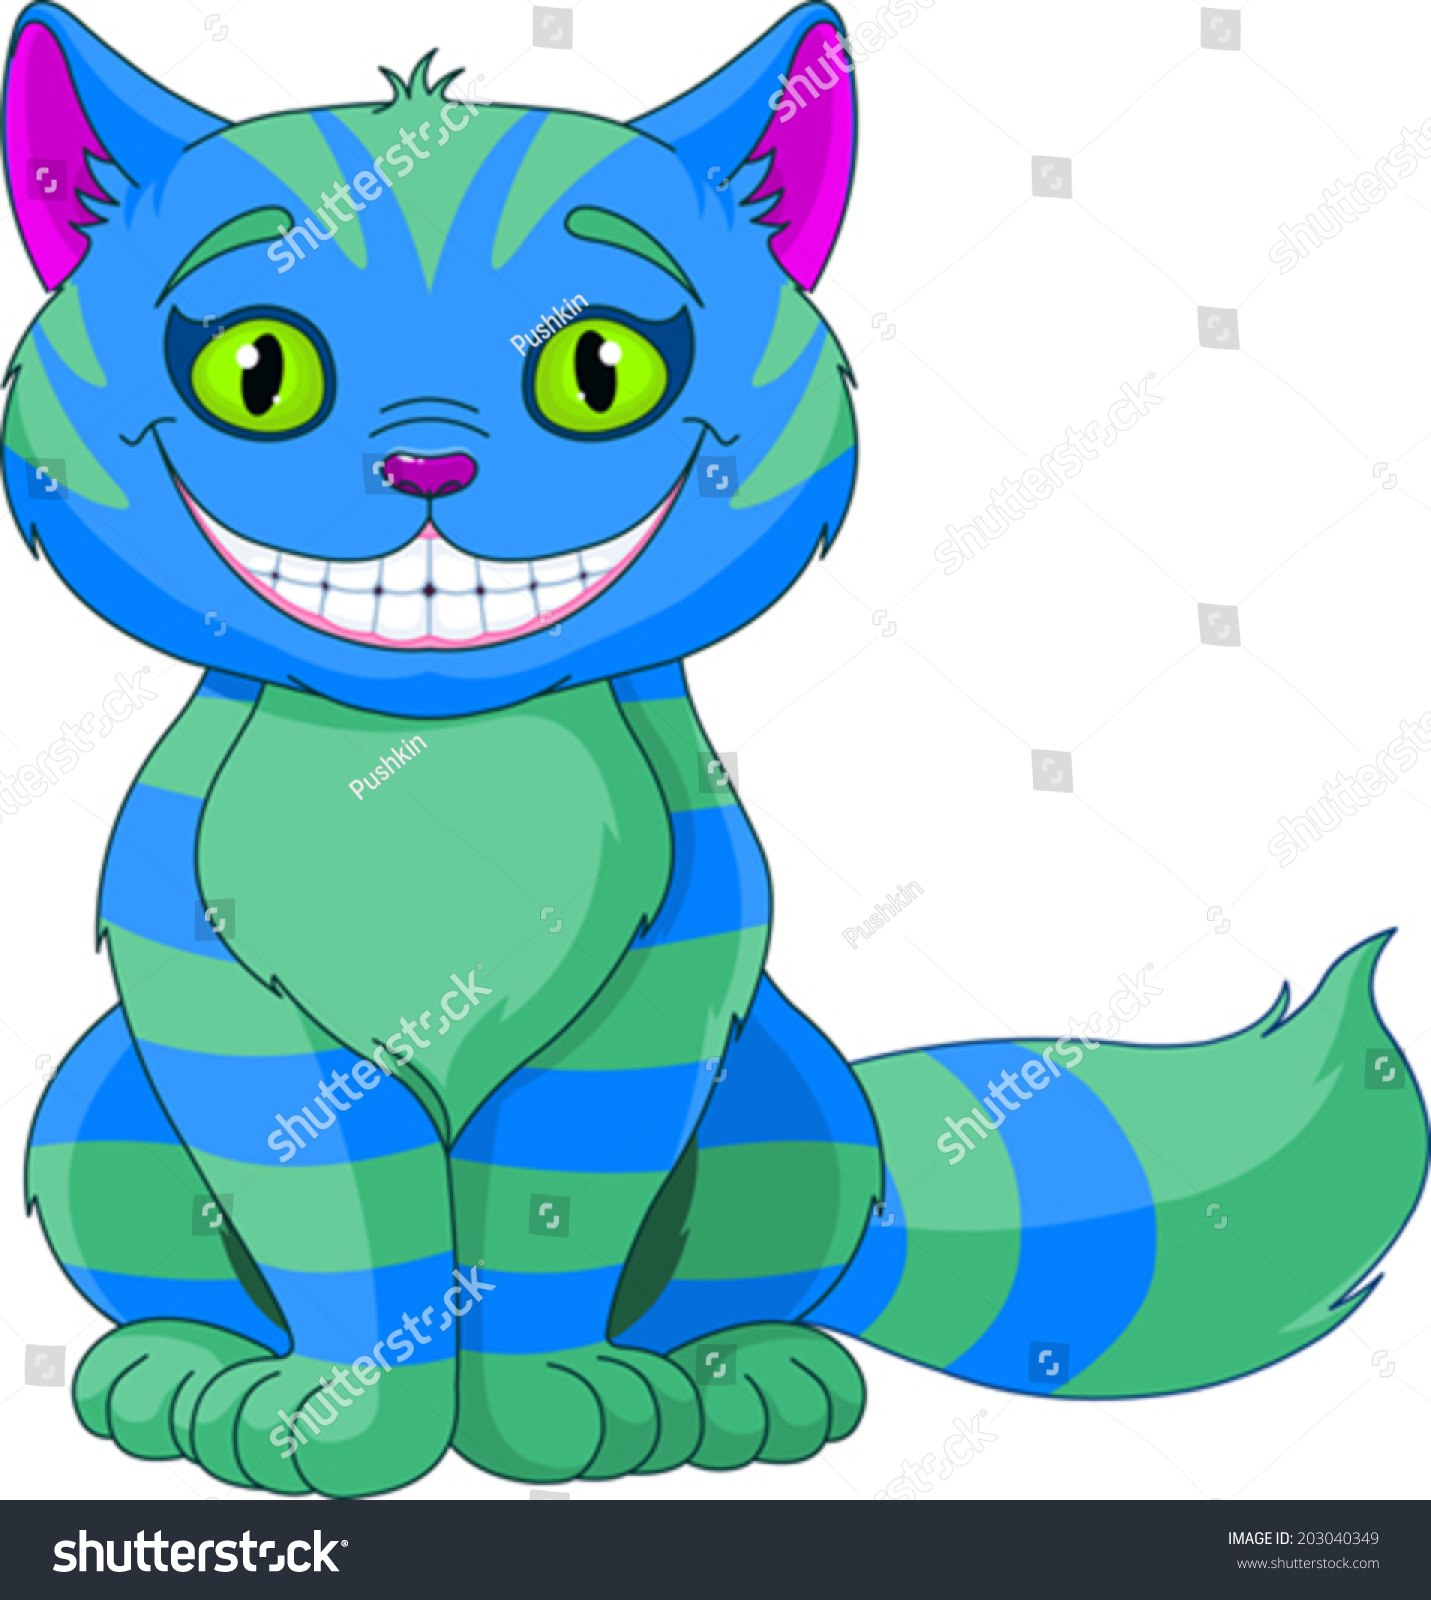 SVG of Illustration of Smiling Cheshire Cat  svg